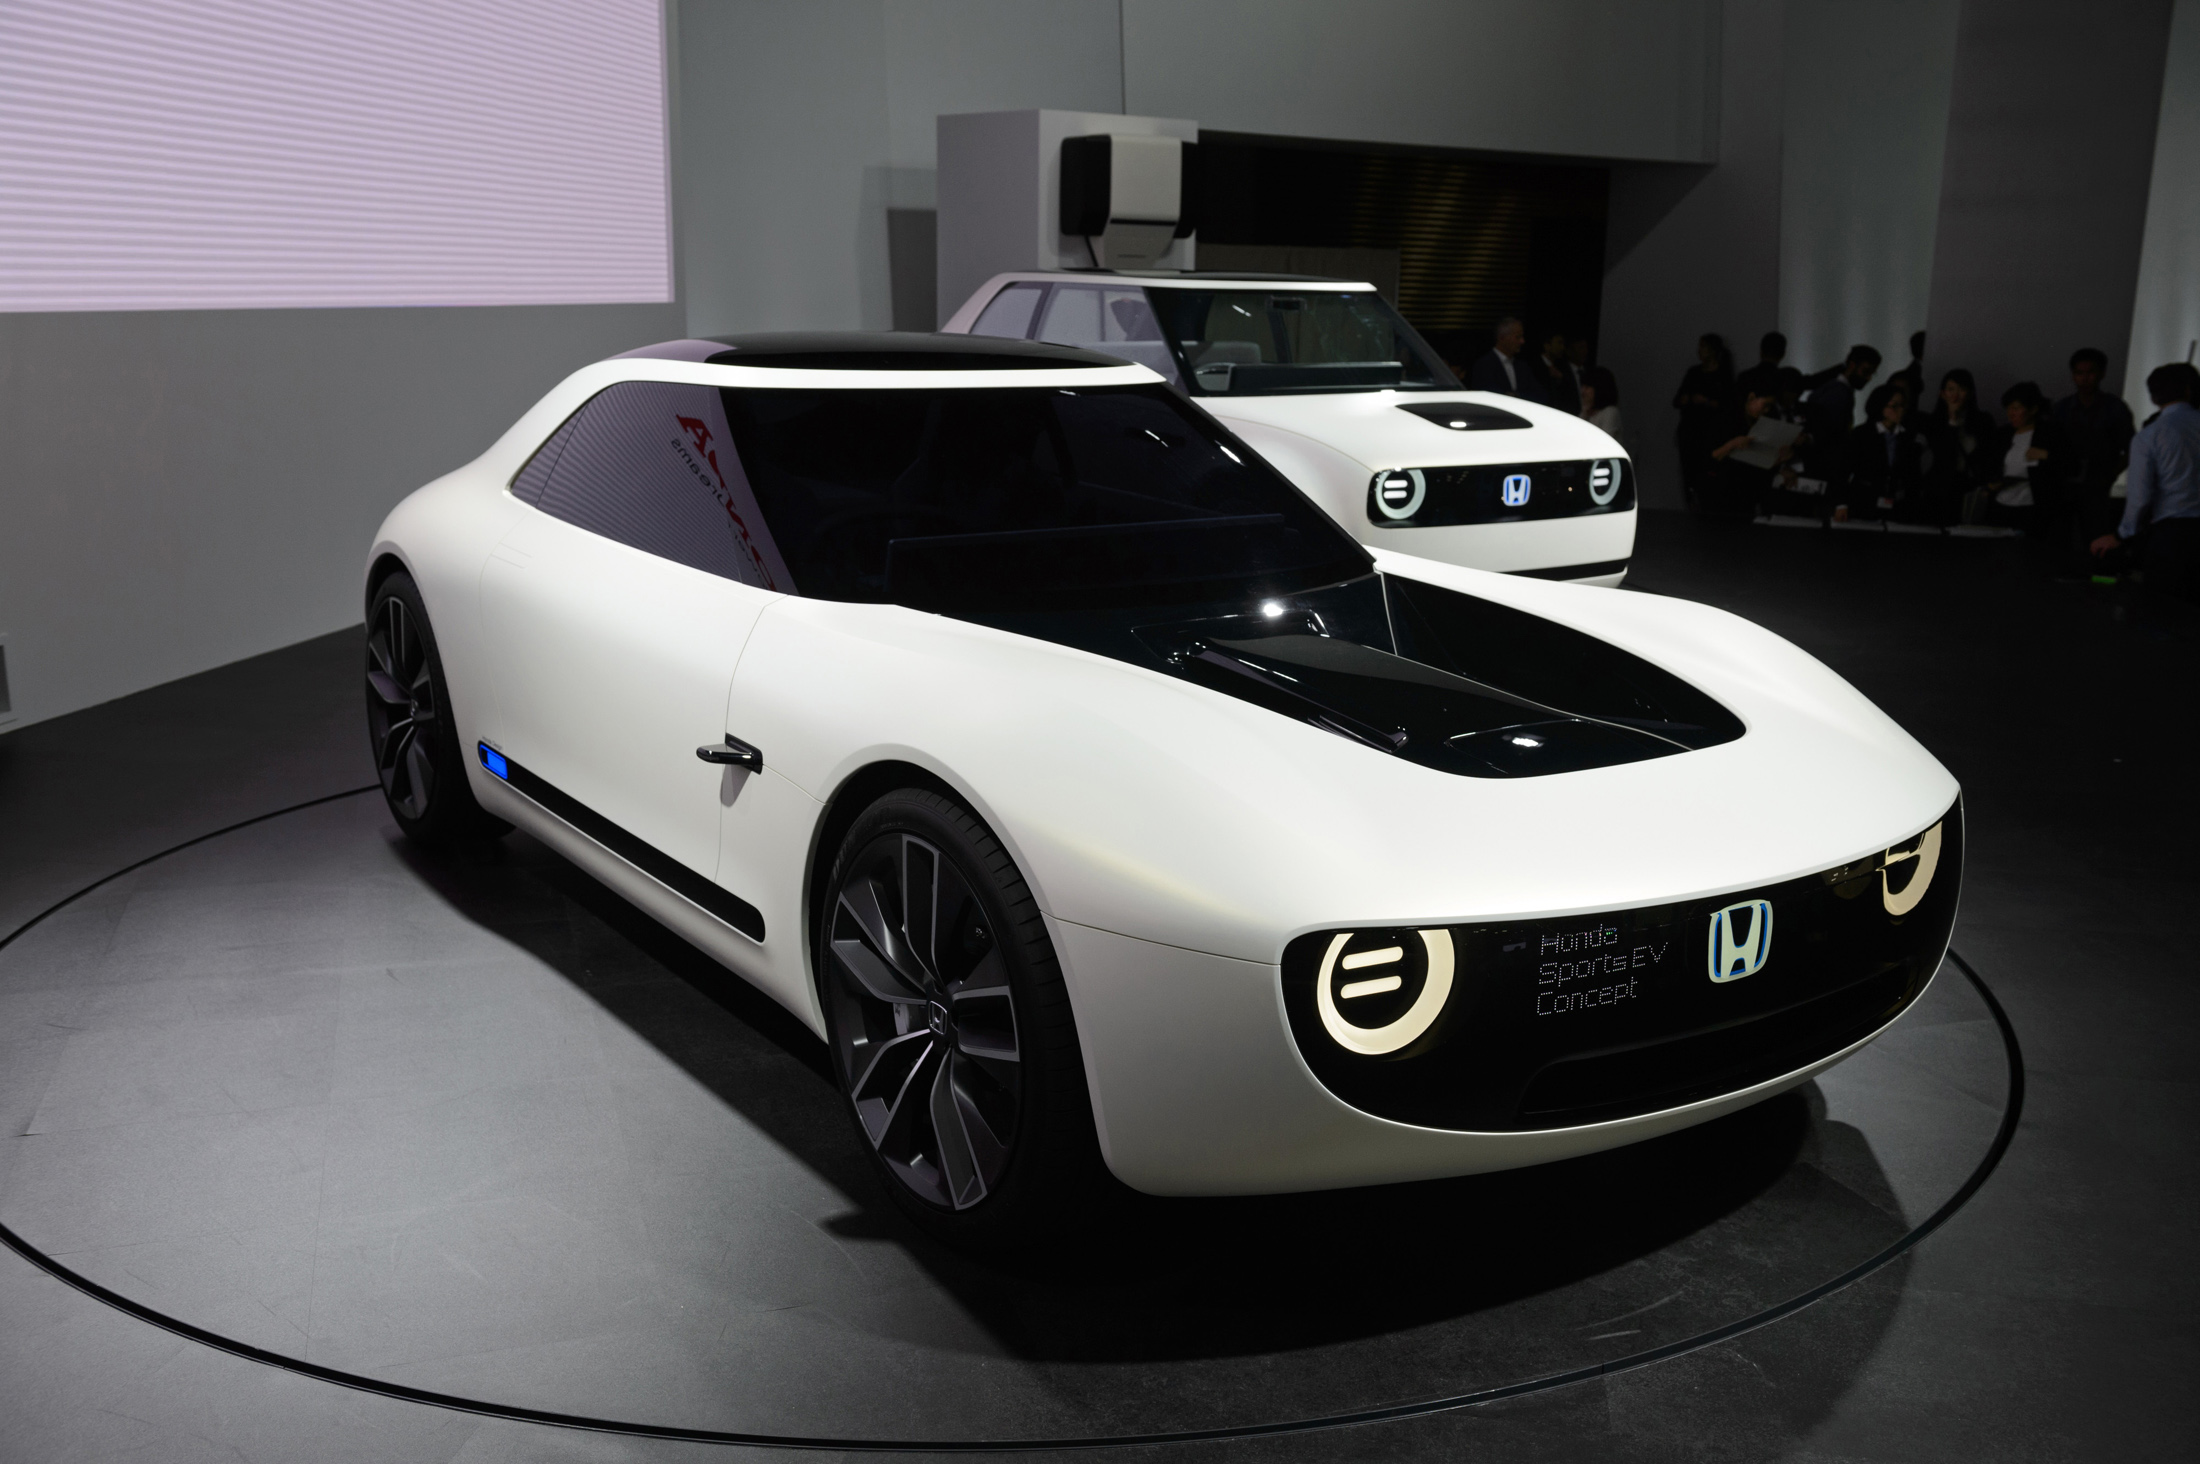 Tokyo's Tech-Focused Motor Show Points to an All-Electric Future 